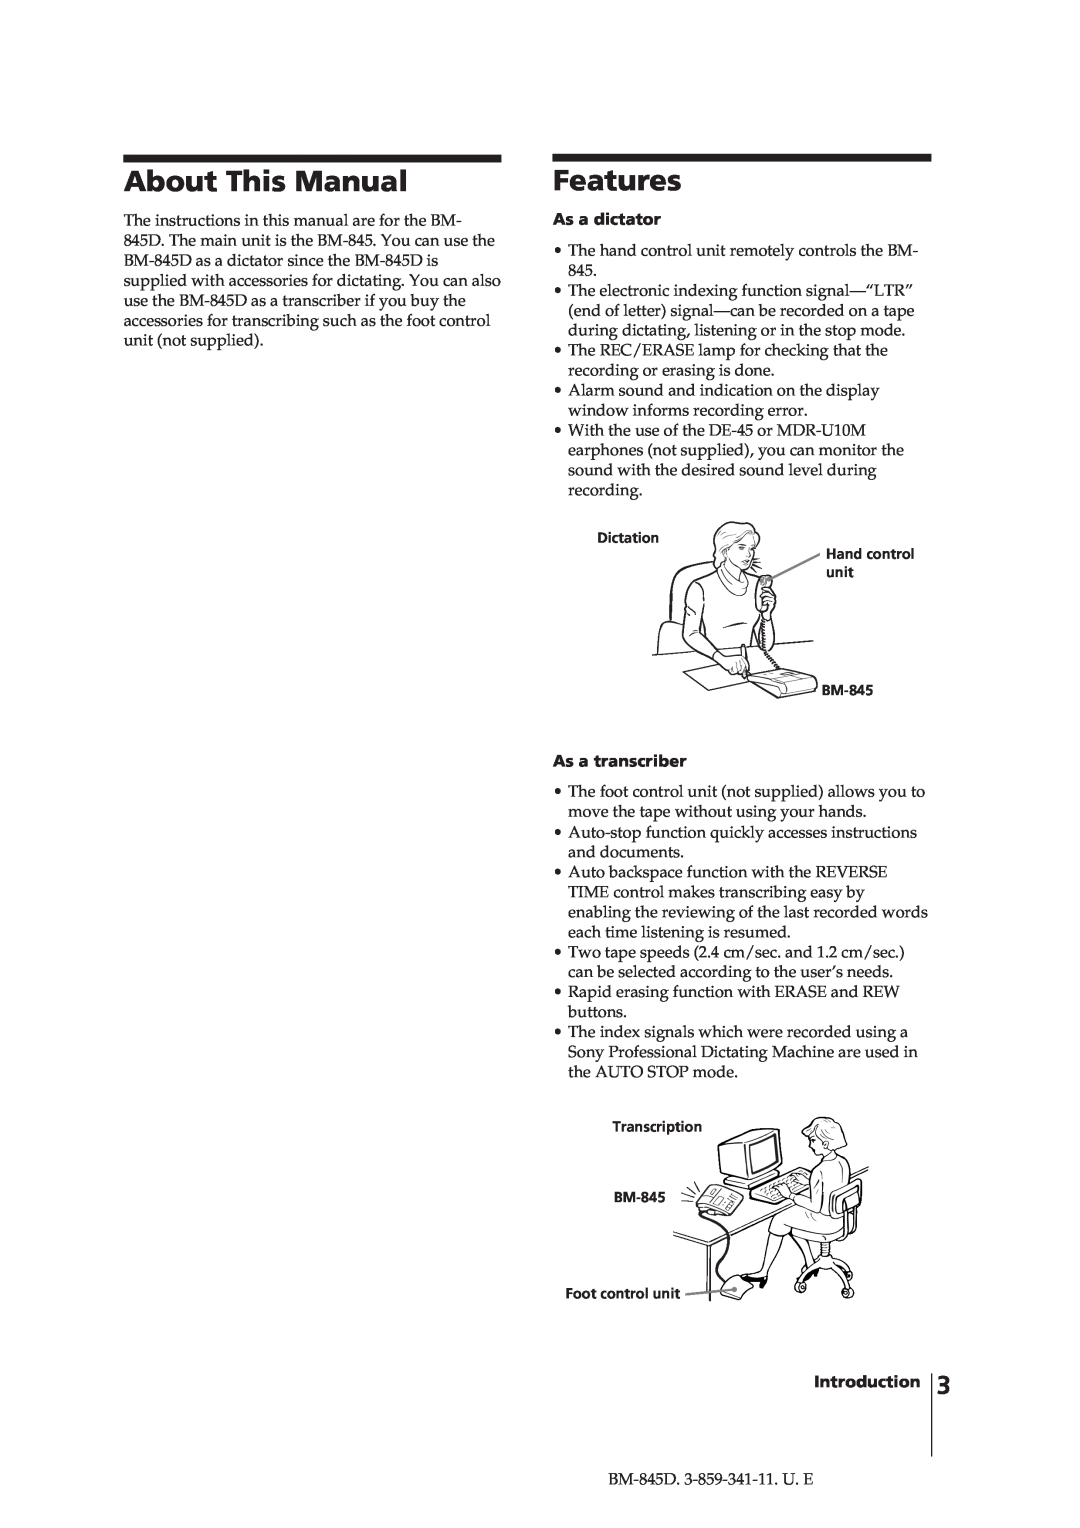 Sony BM-845D manual About This Manual, Features, As a dictator, As a transcriber, Introduction 